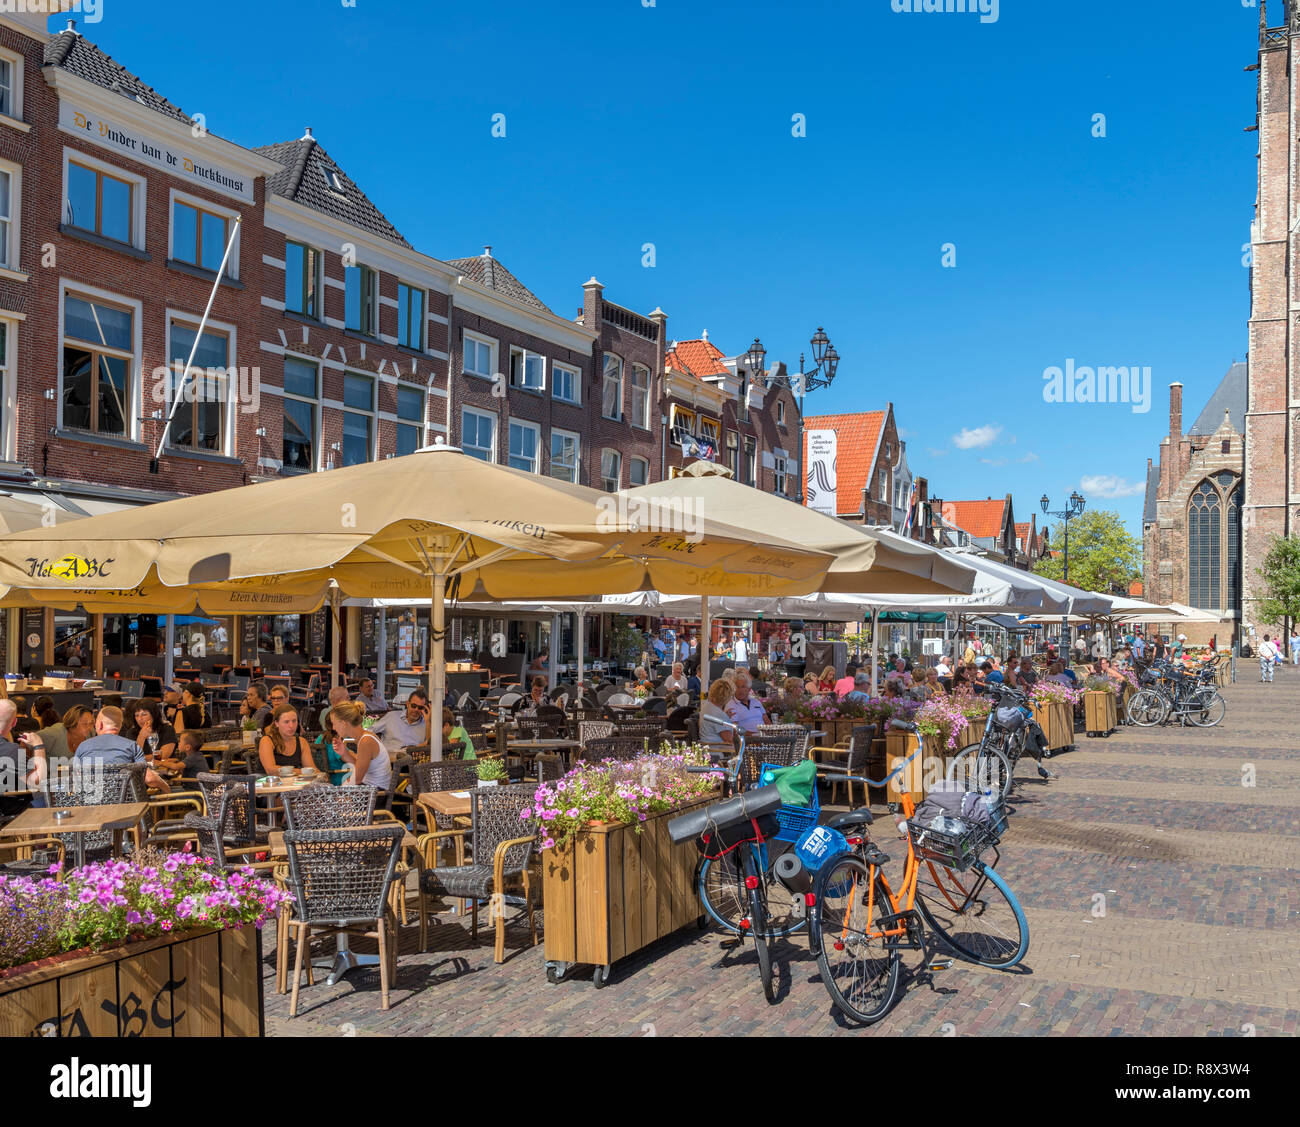 Sidewalk cafes in the Markt (Market Square), Delft, Zuid-Holland (South Holland), Netherlands Stock Photo